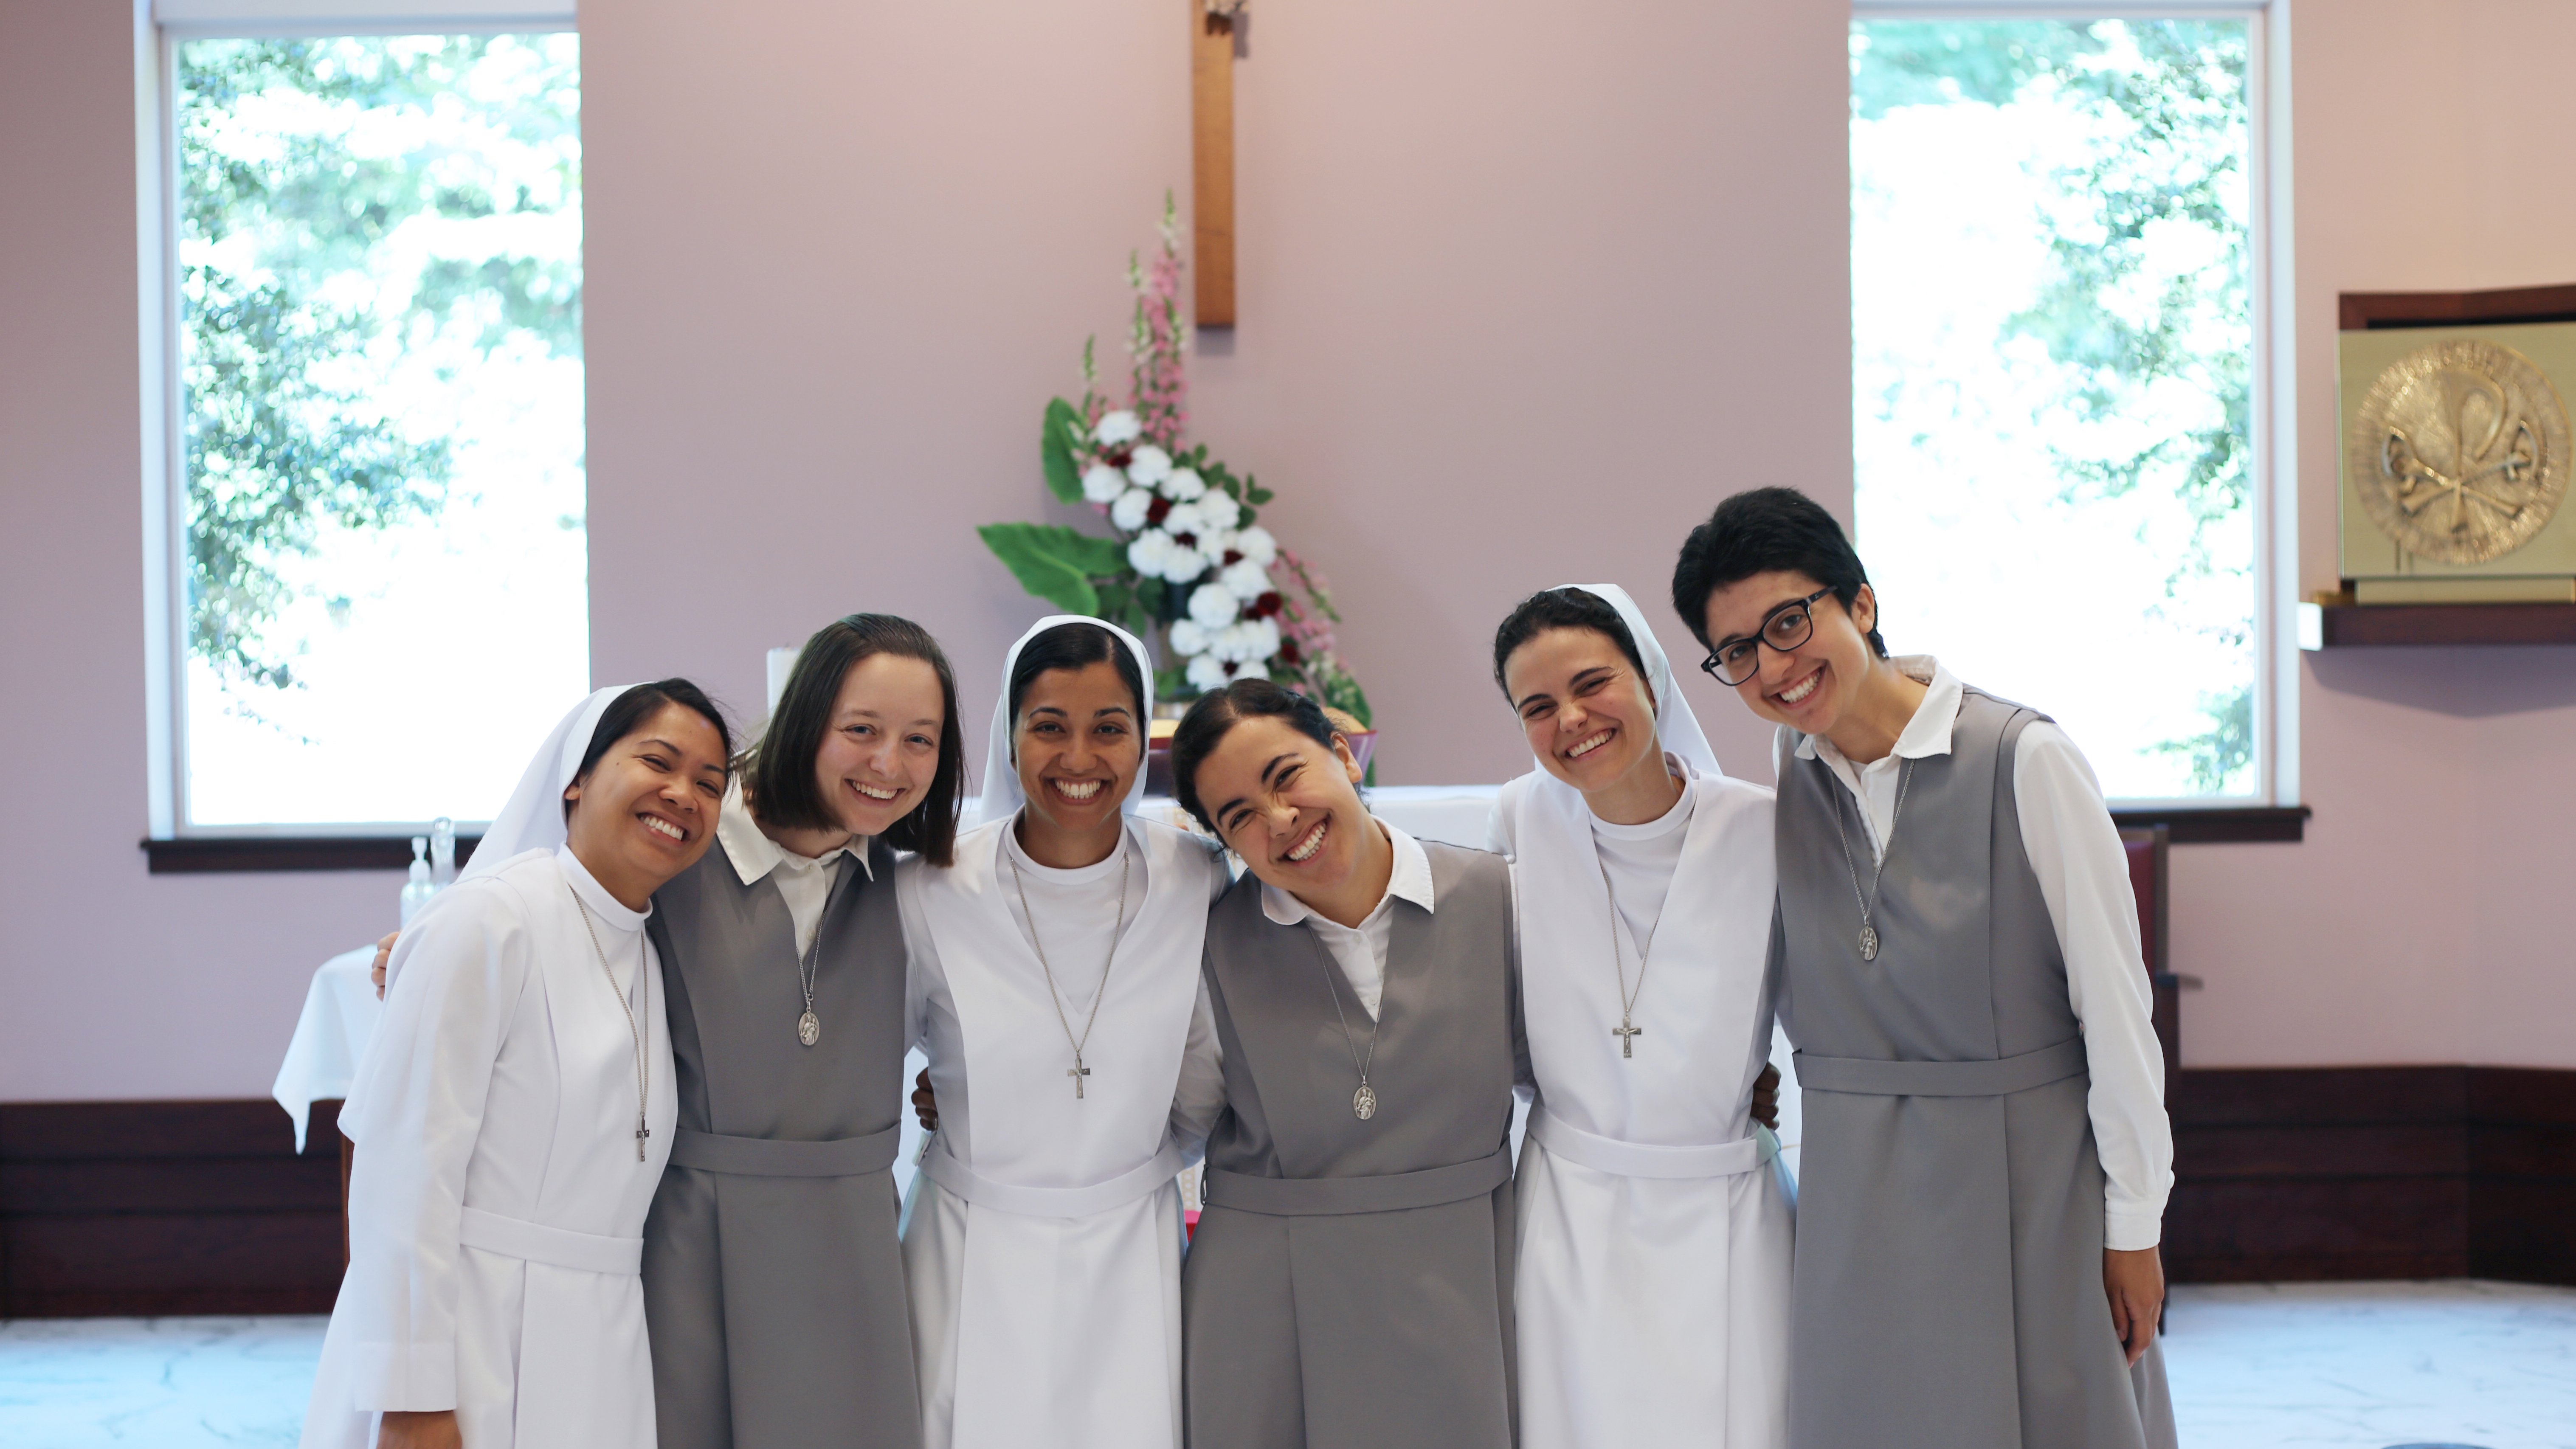 Local Salesian Sister to Profess First Vows this Summer